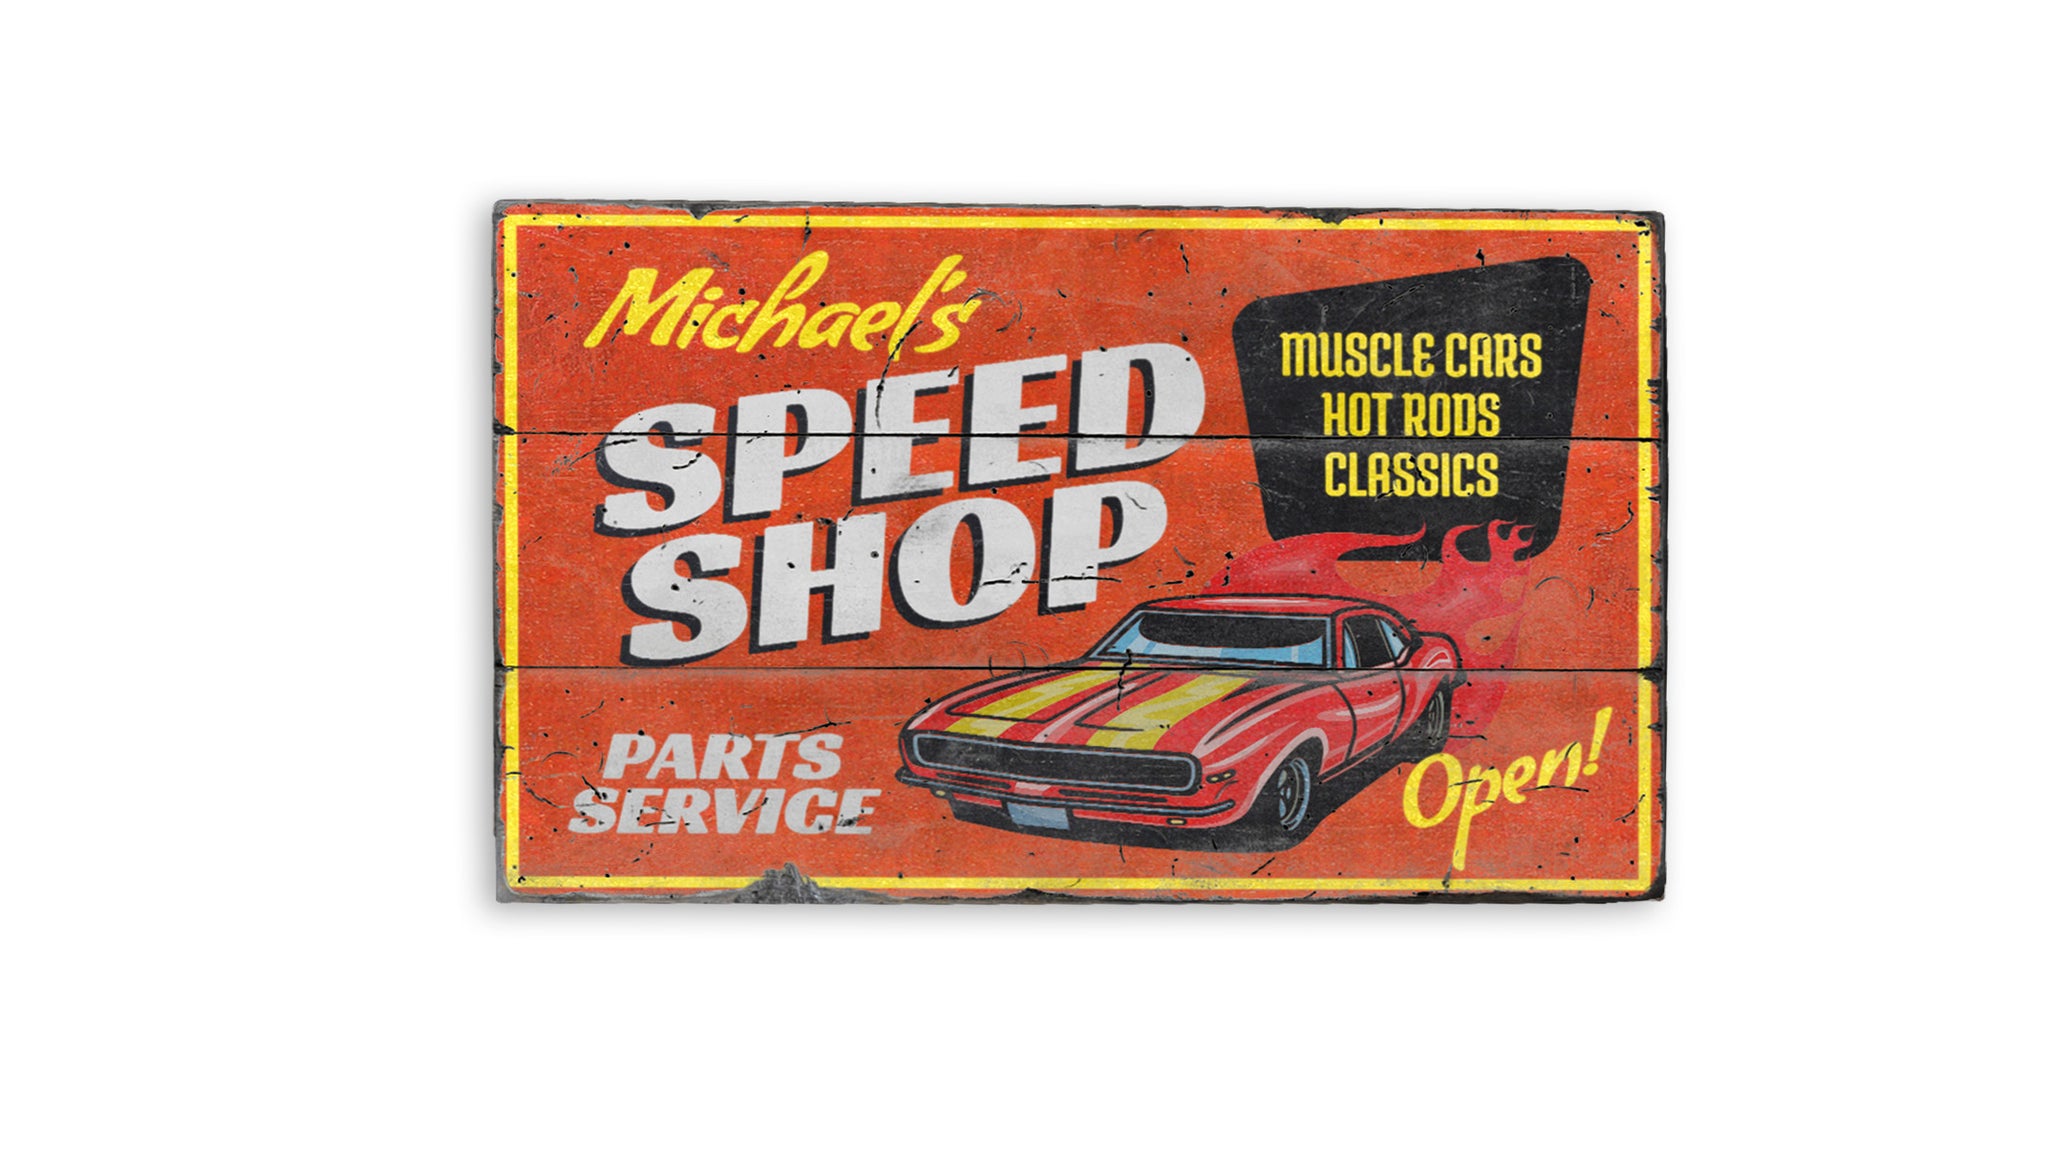 Parts and Service Speed Shop Rustic Wood Sign